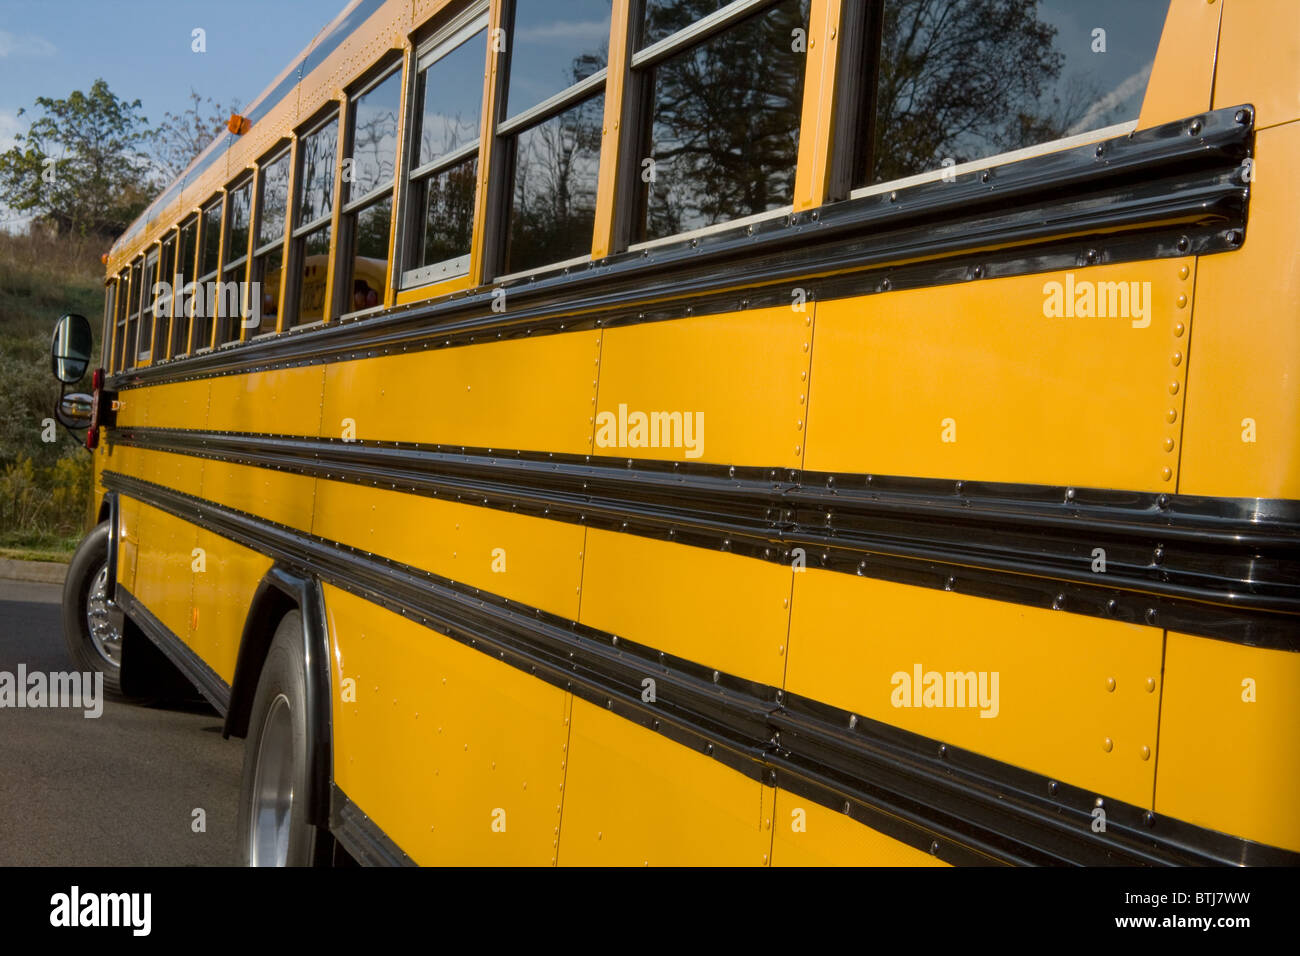 Looking down the side of a school bus. Stock Photo